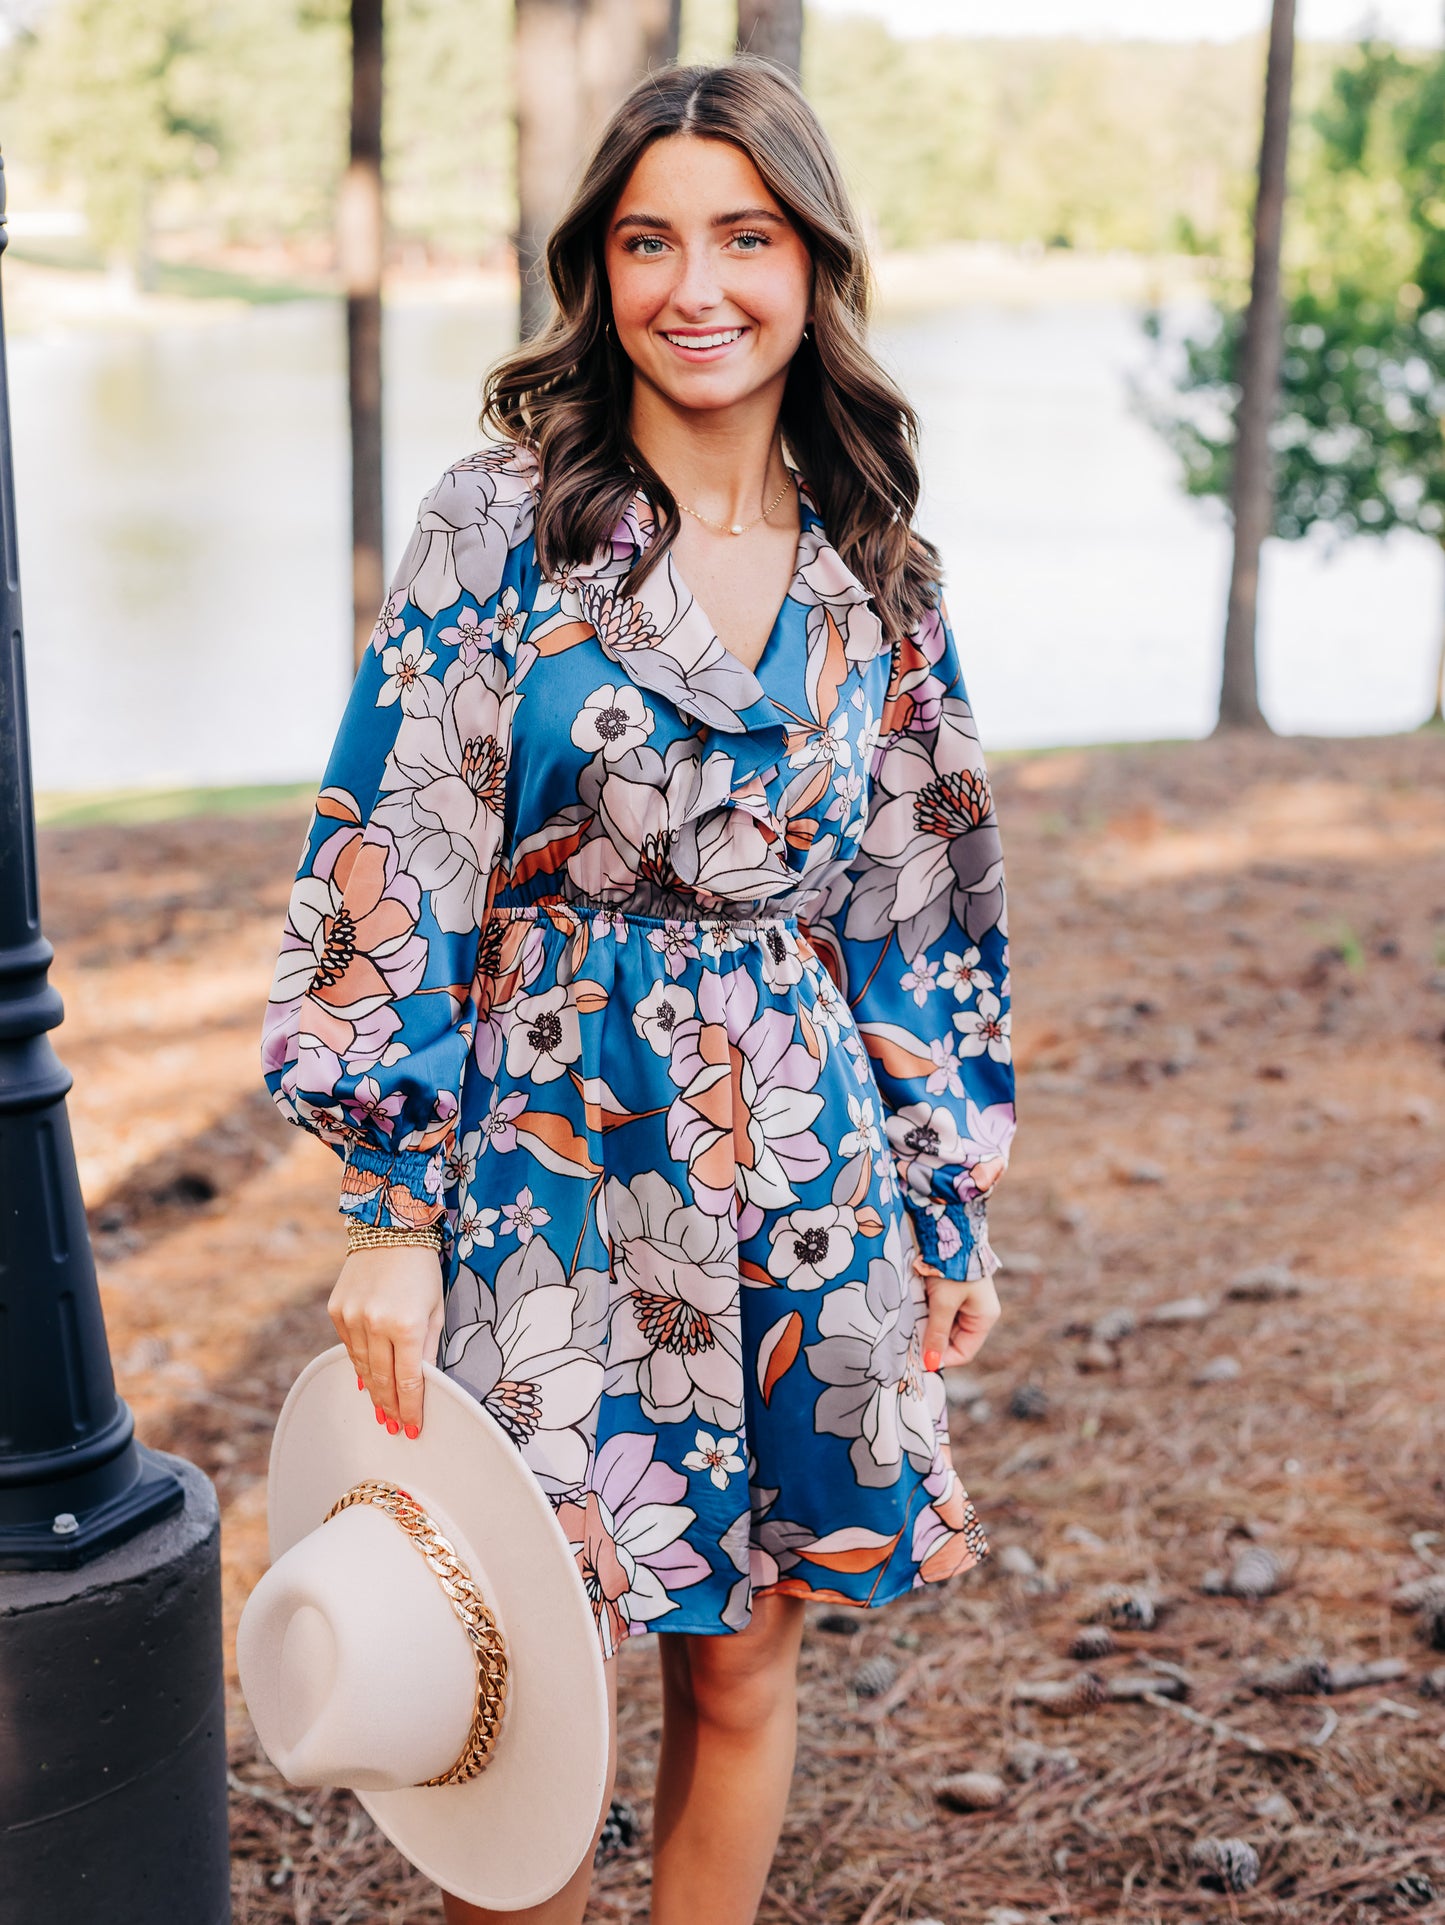 Capture The Moment Teal Multi Floral Dress